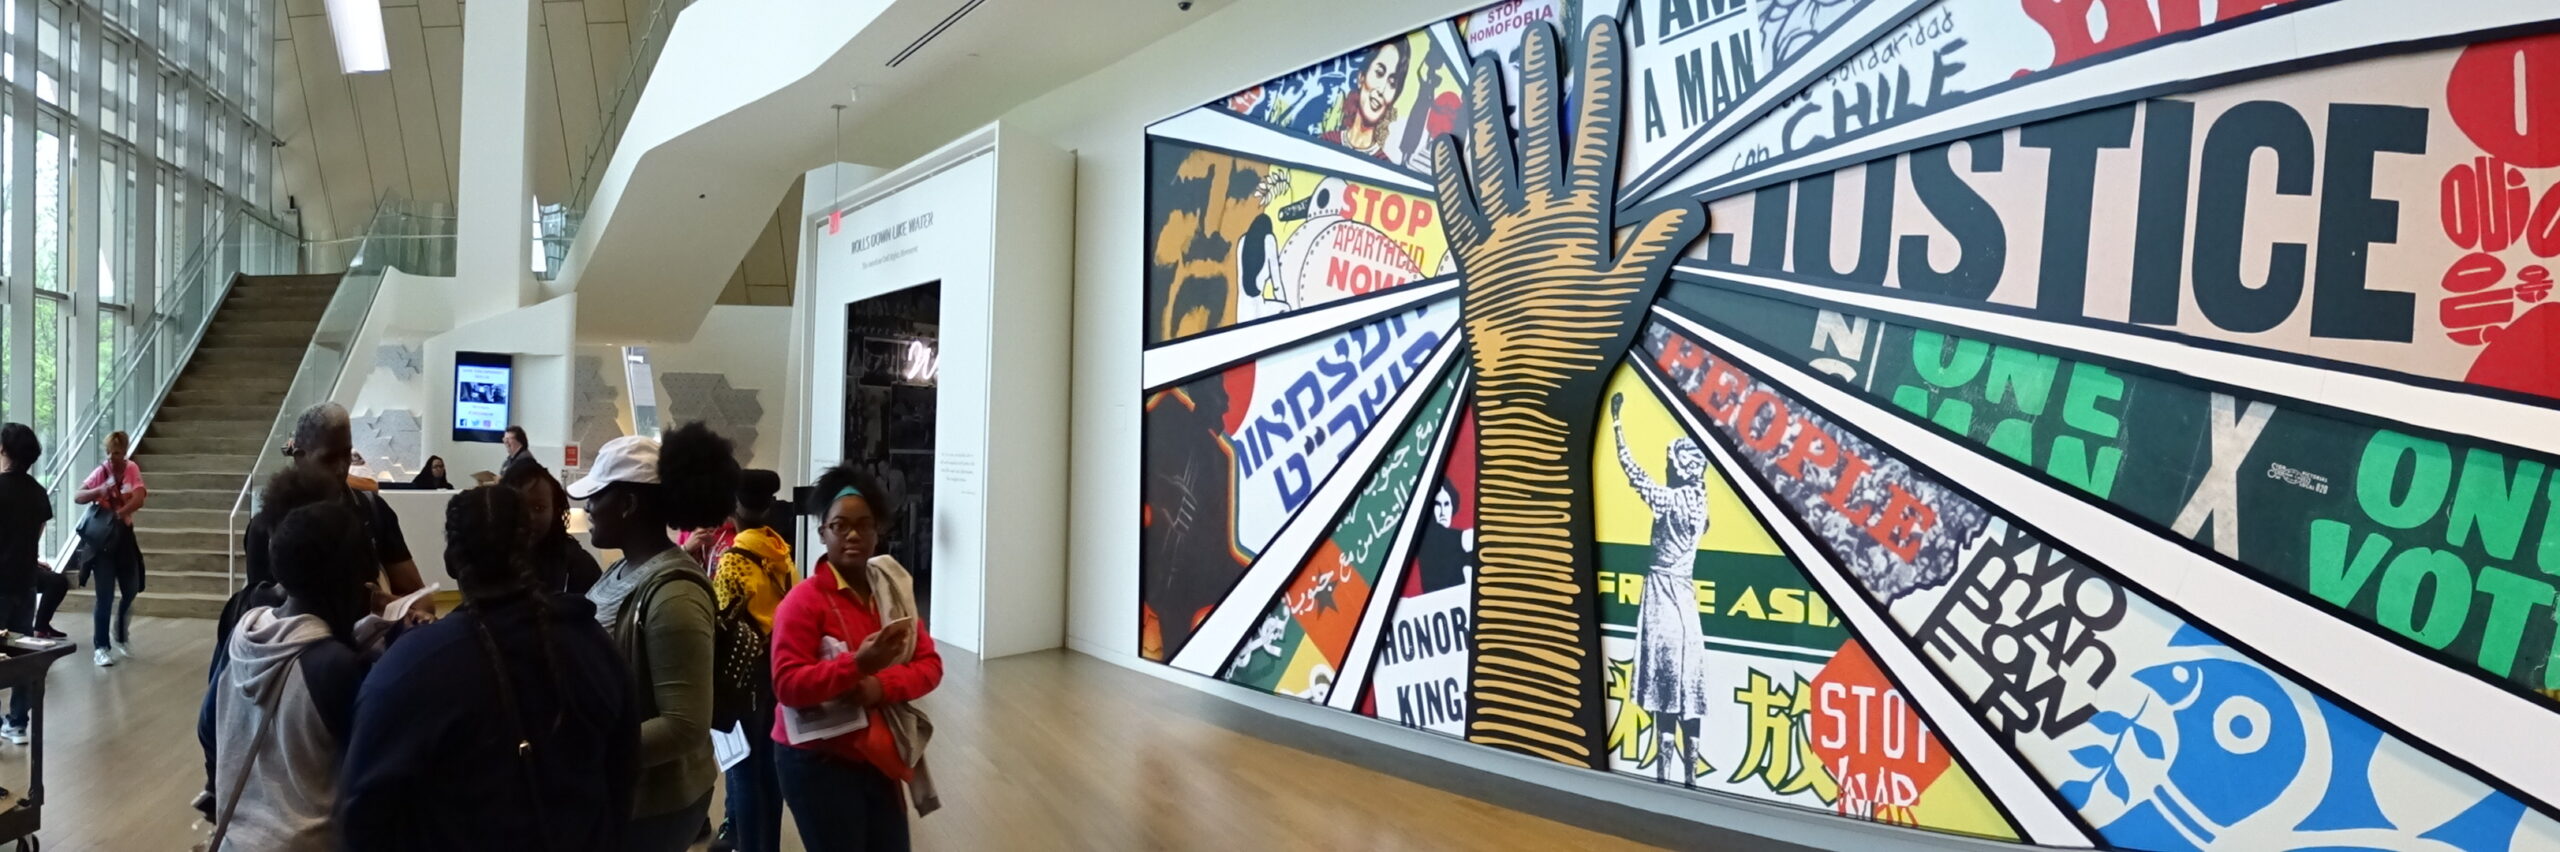 Panorama of a lobby, highlighting a mural with a hand in the center with various civil and human rights messages/images surrounding the hand.